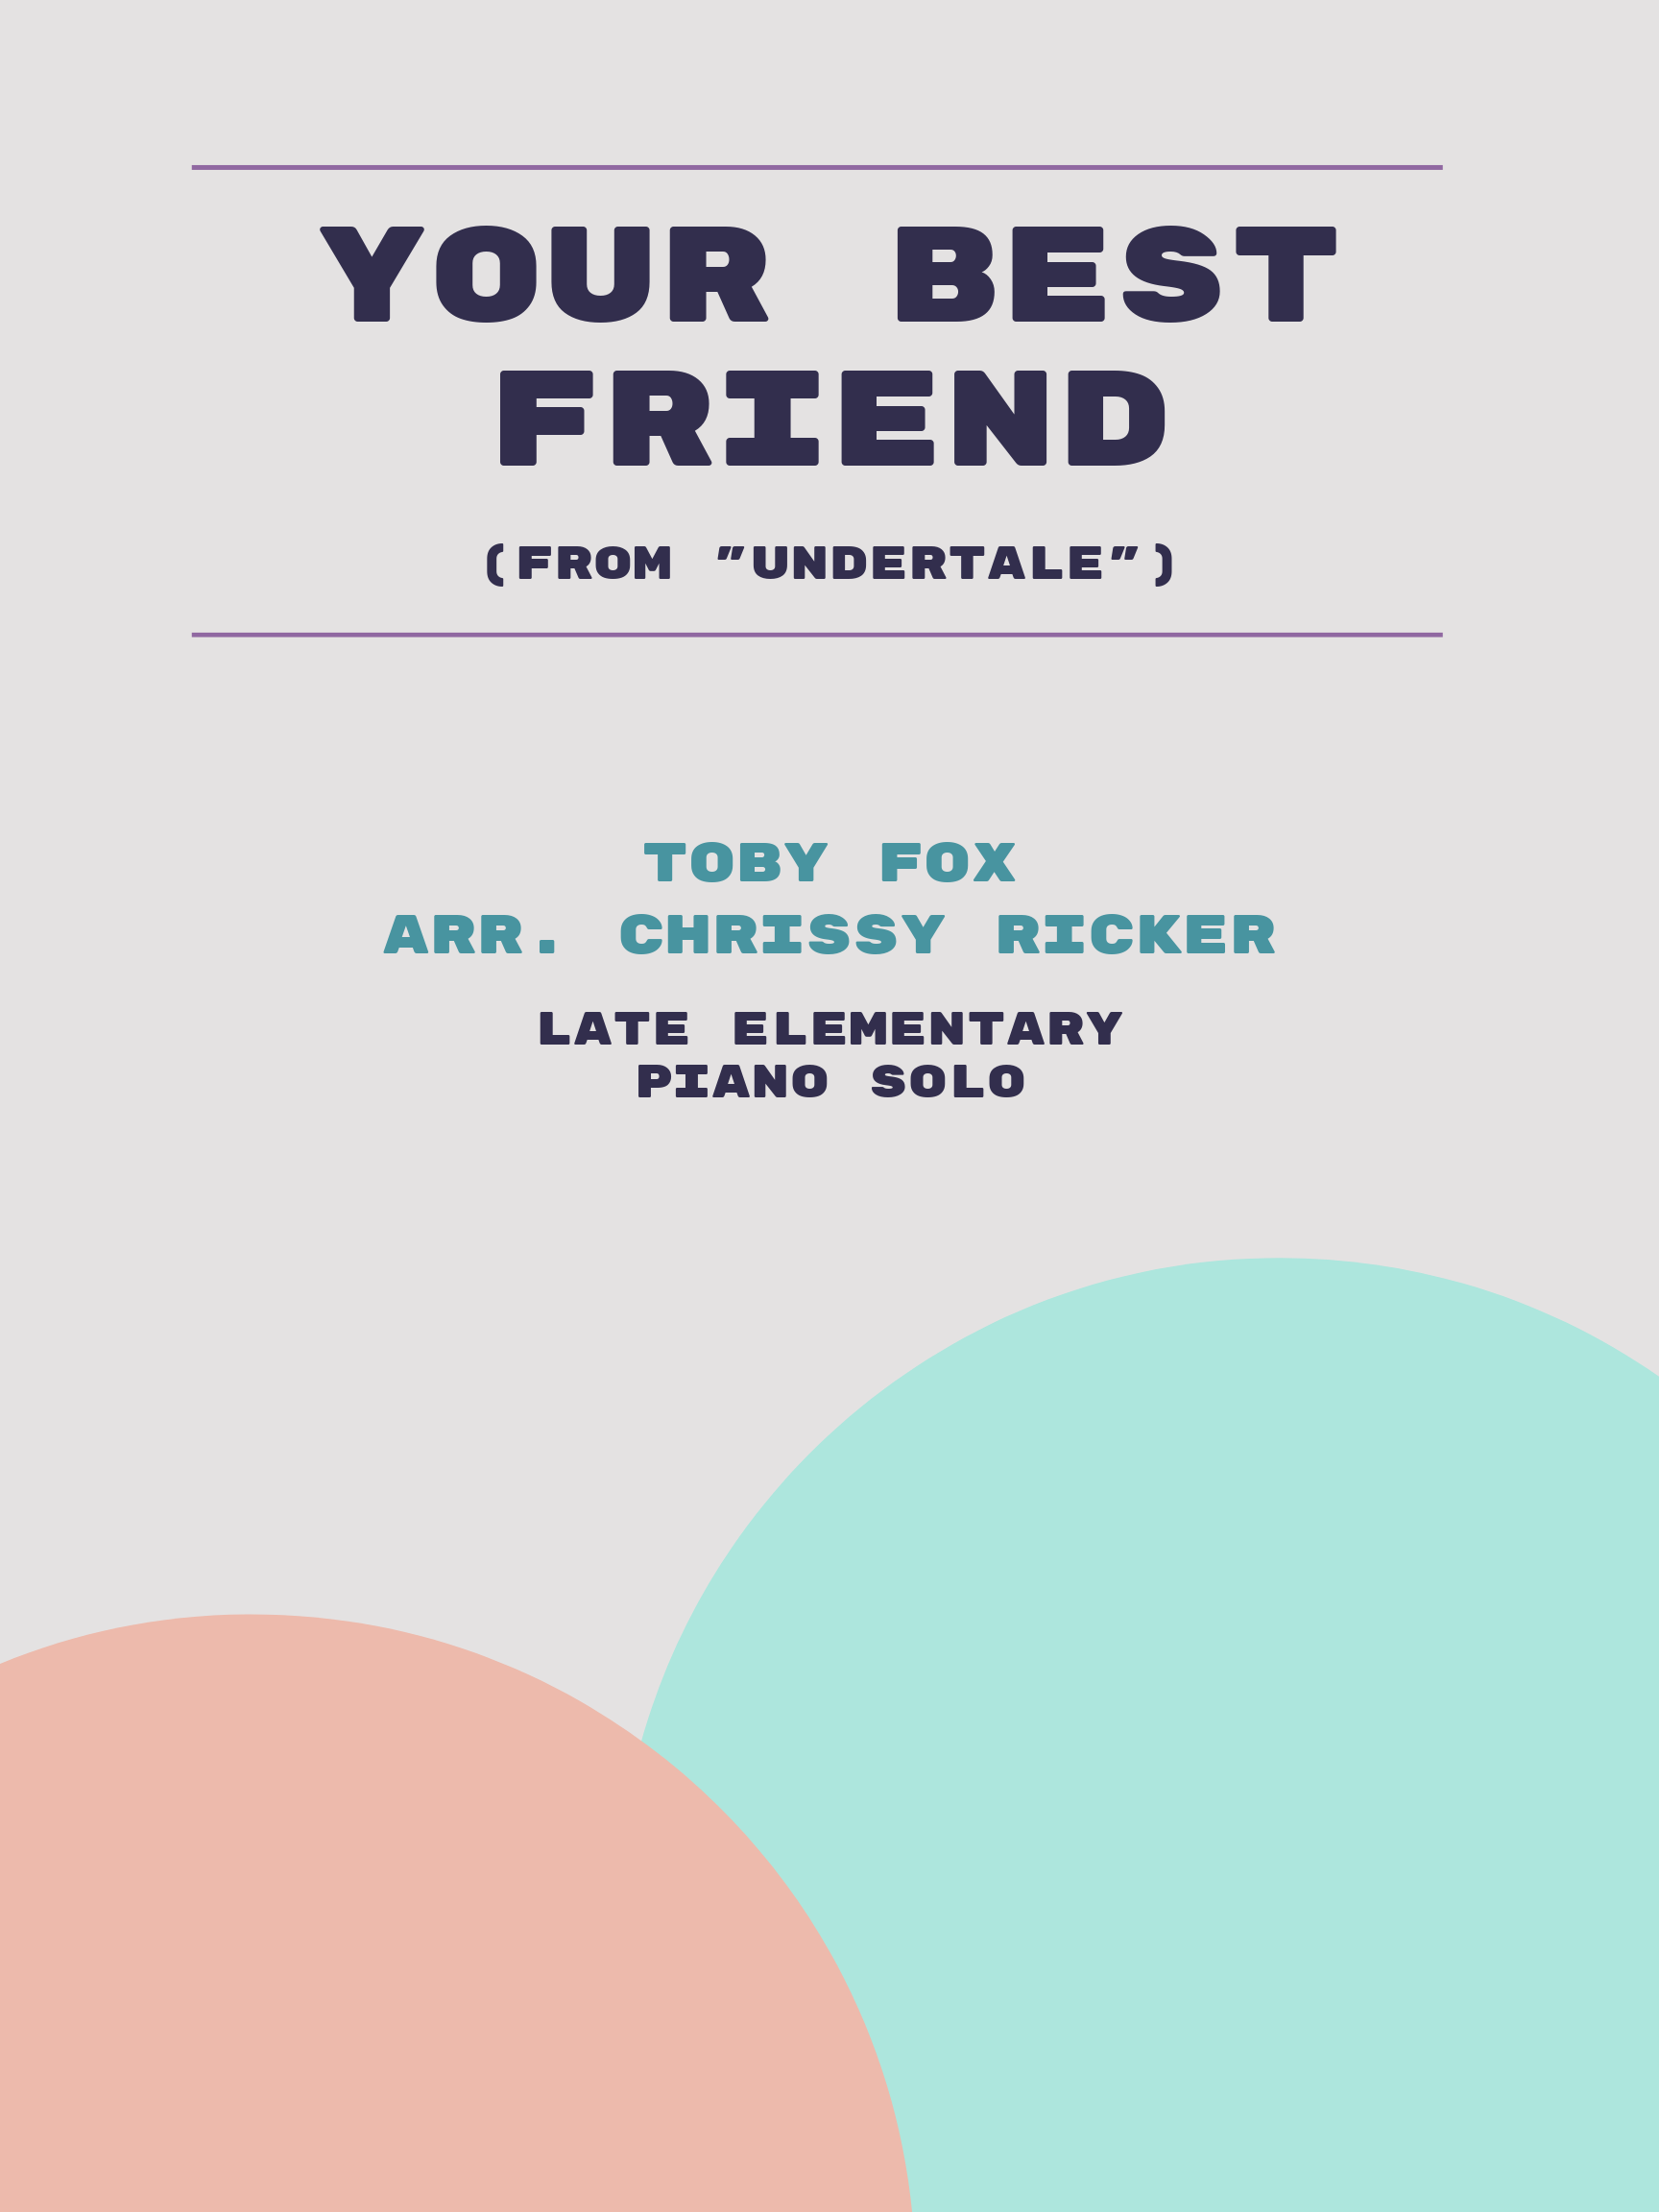 Your Best Friend by Toby Fox